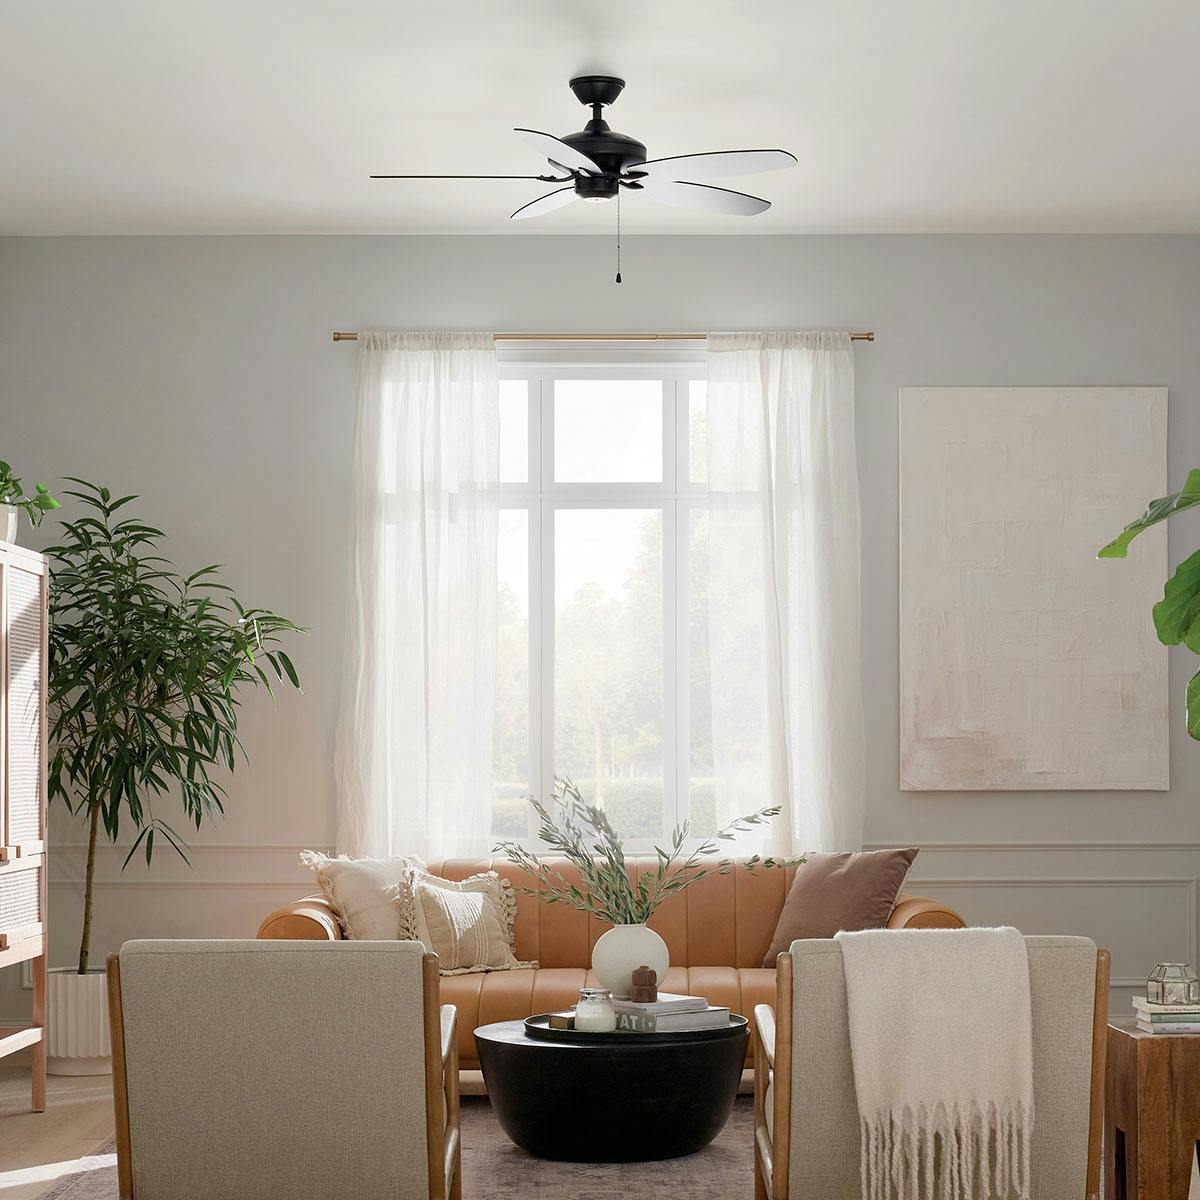 Day time living room featuring Renew ceiling fan 330160SBK